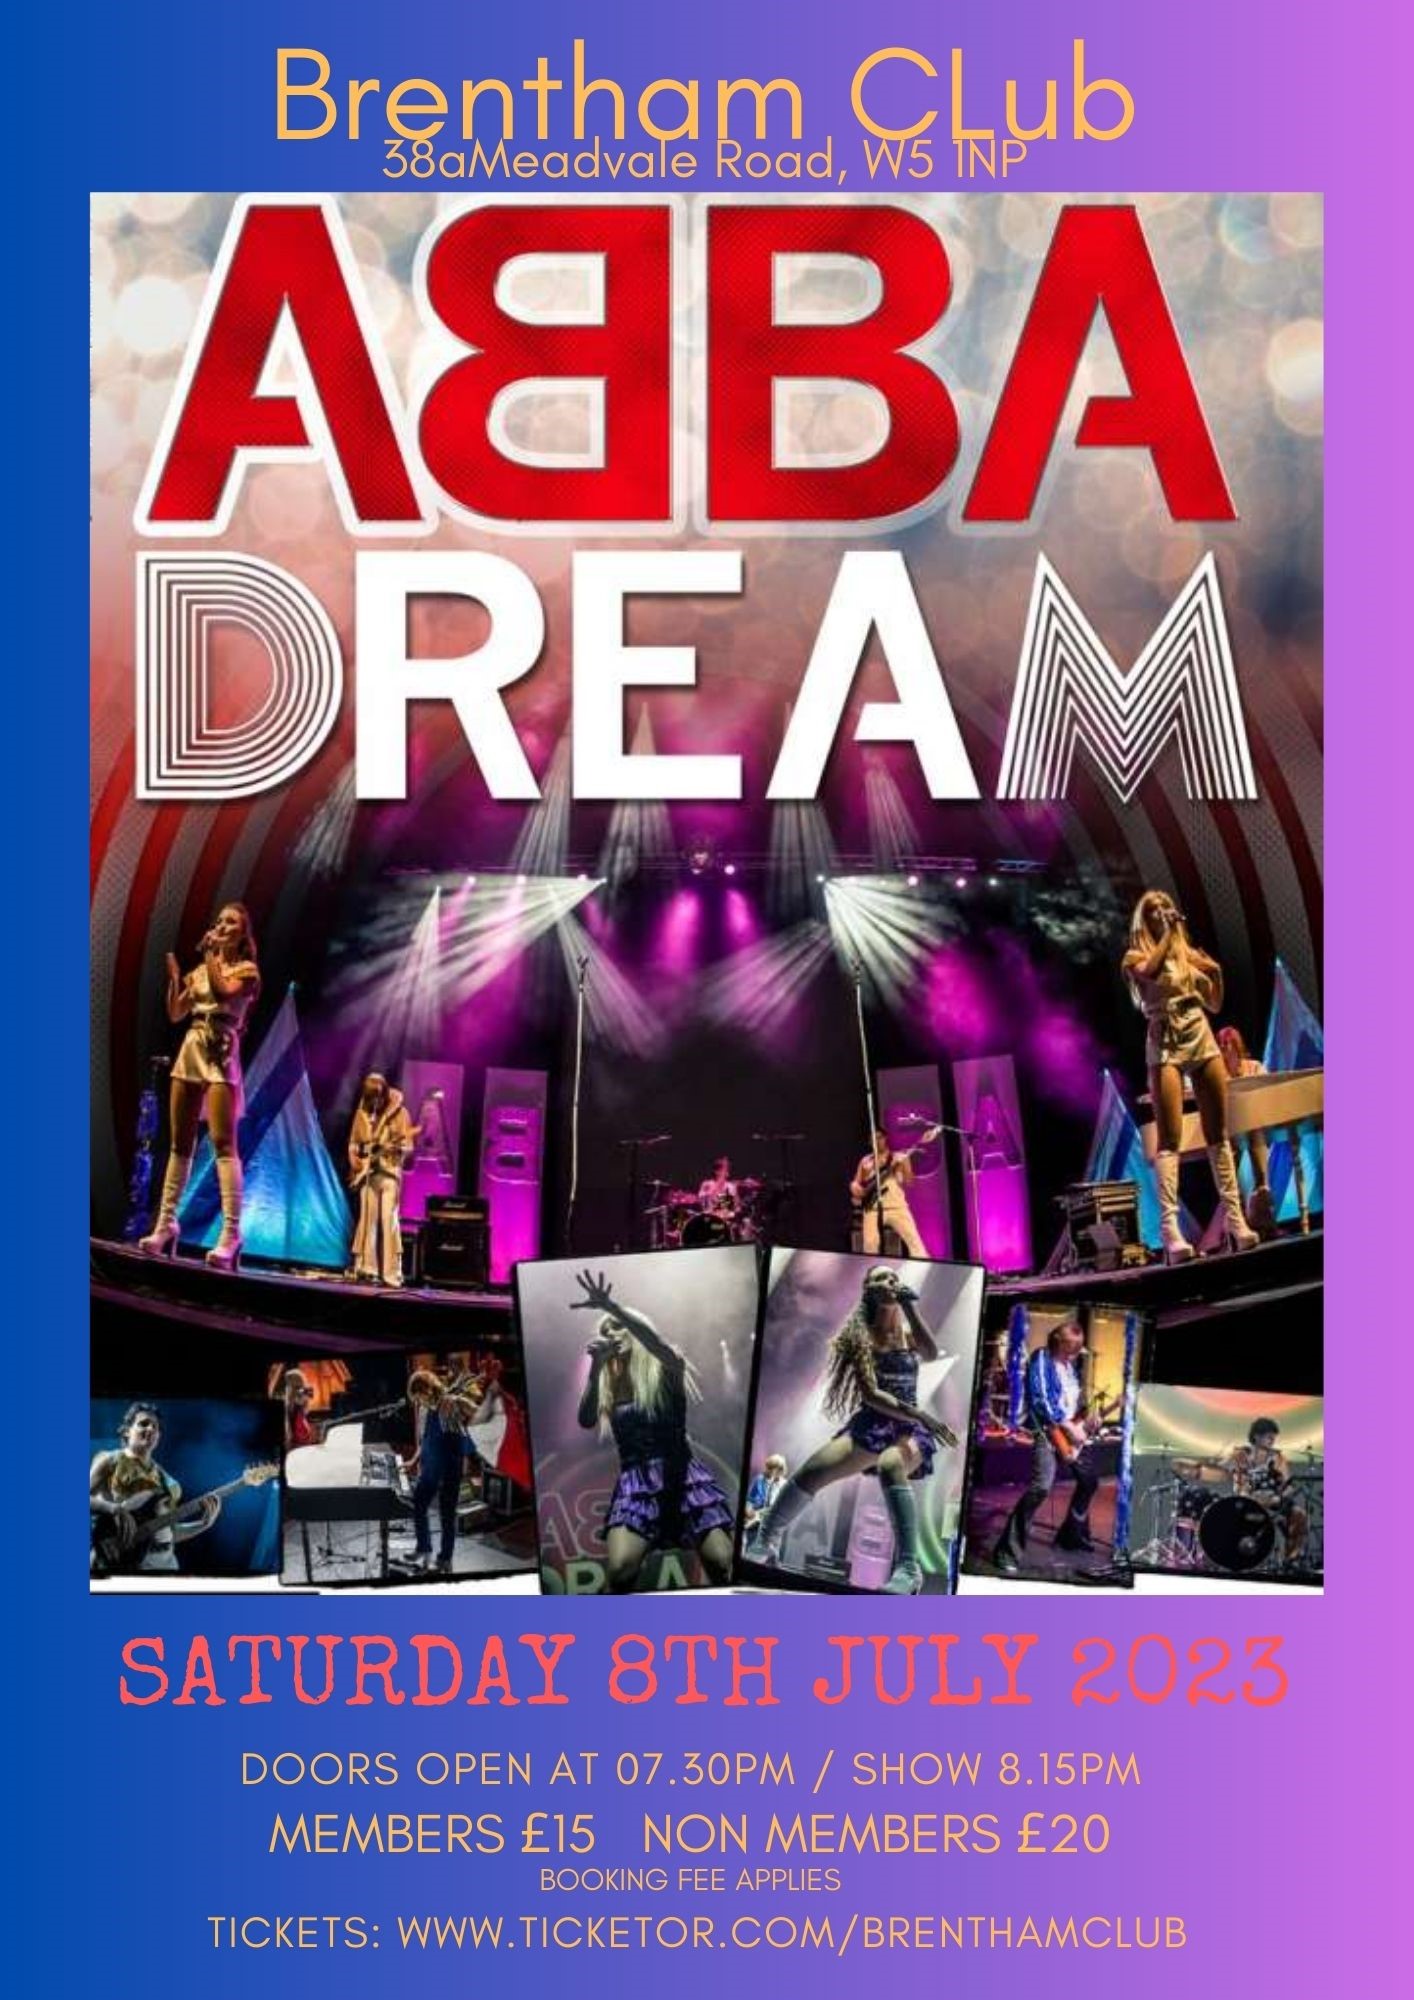 ABBA DREAM - ABBA Tribute Night  on Jul 08, 20:15@The Brentham Club - Buy tickets and Get information on Brenthamclub.co.uk 